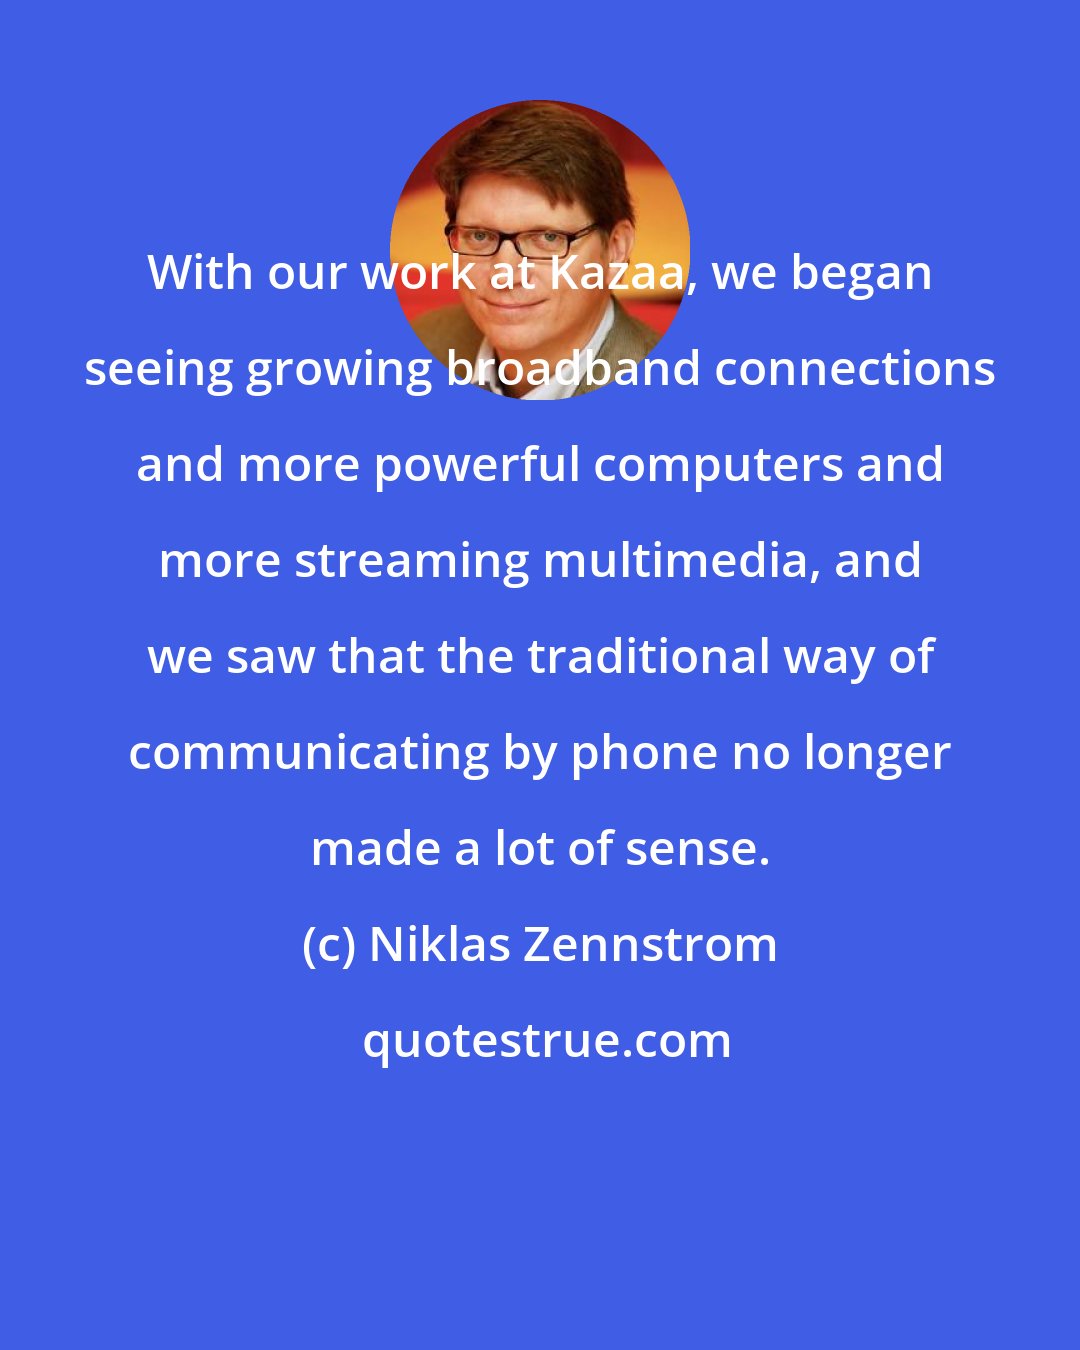 Niklas Zennstrom: With our work at Kazaa, we began seeing growing broadband connections and more powerful computers and more streaming multimedia, and we saw that the traditional way of communicating by phone no longer made a lot of sense.